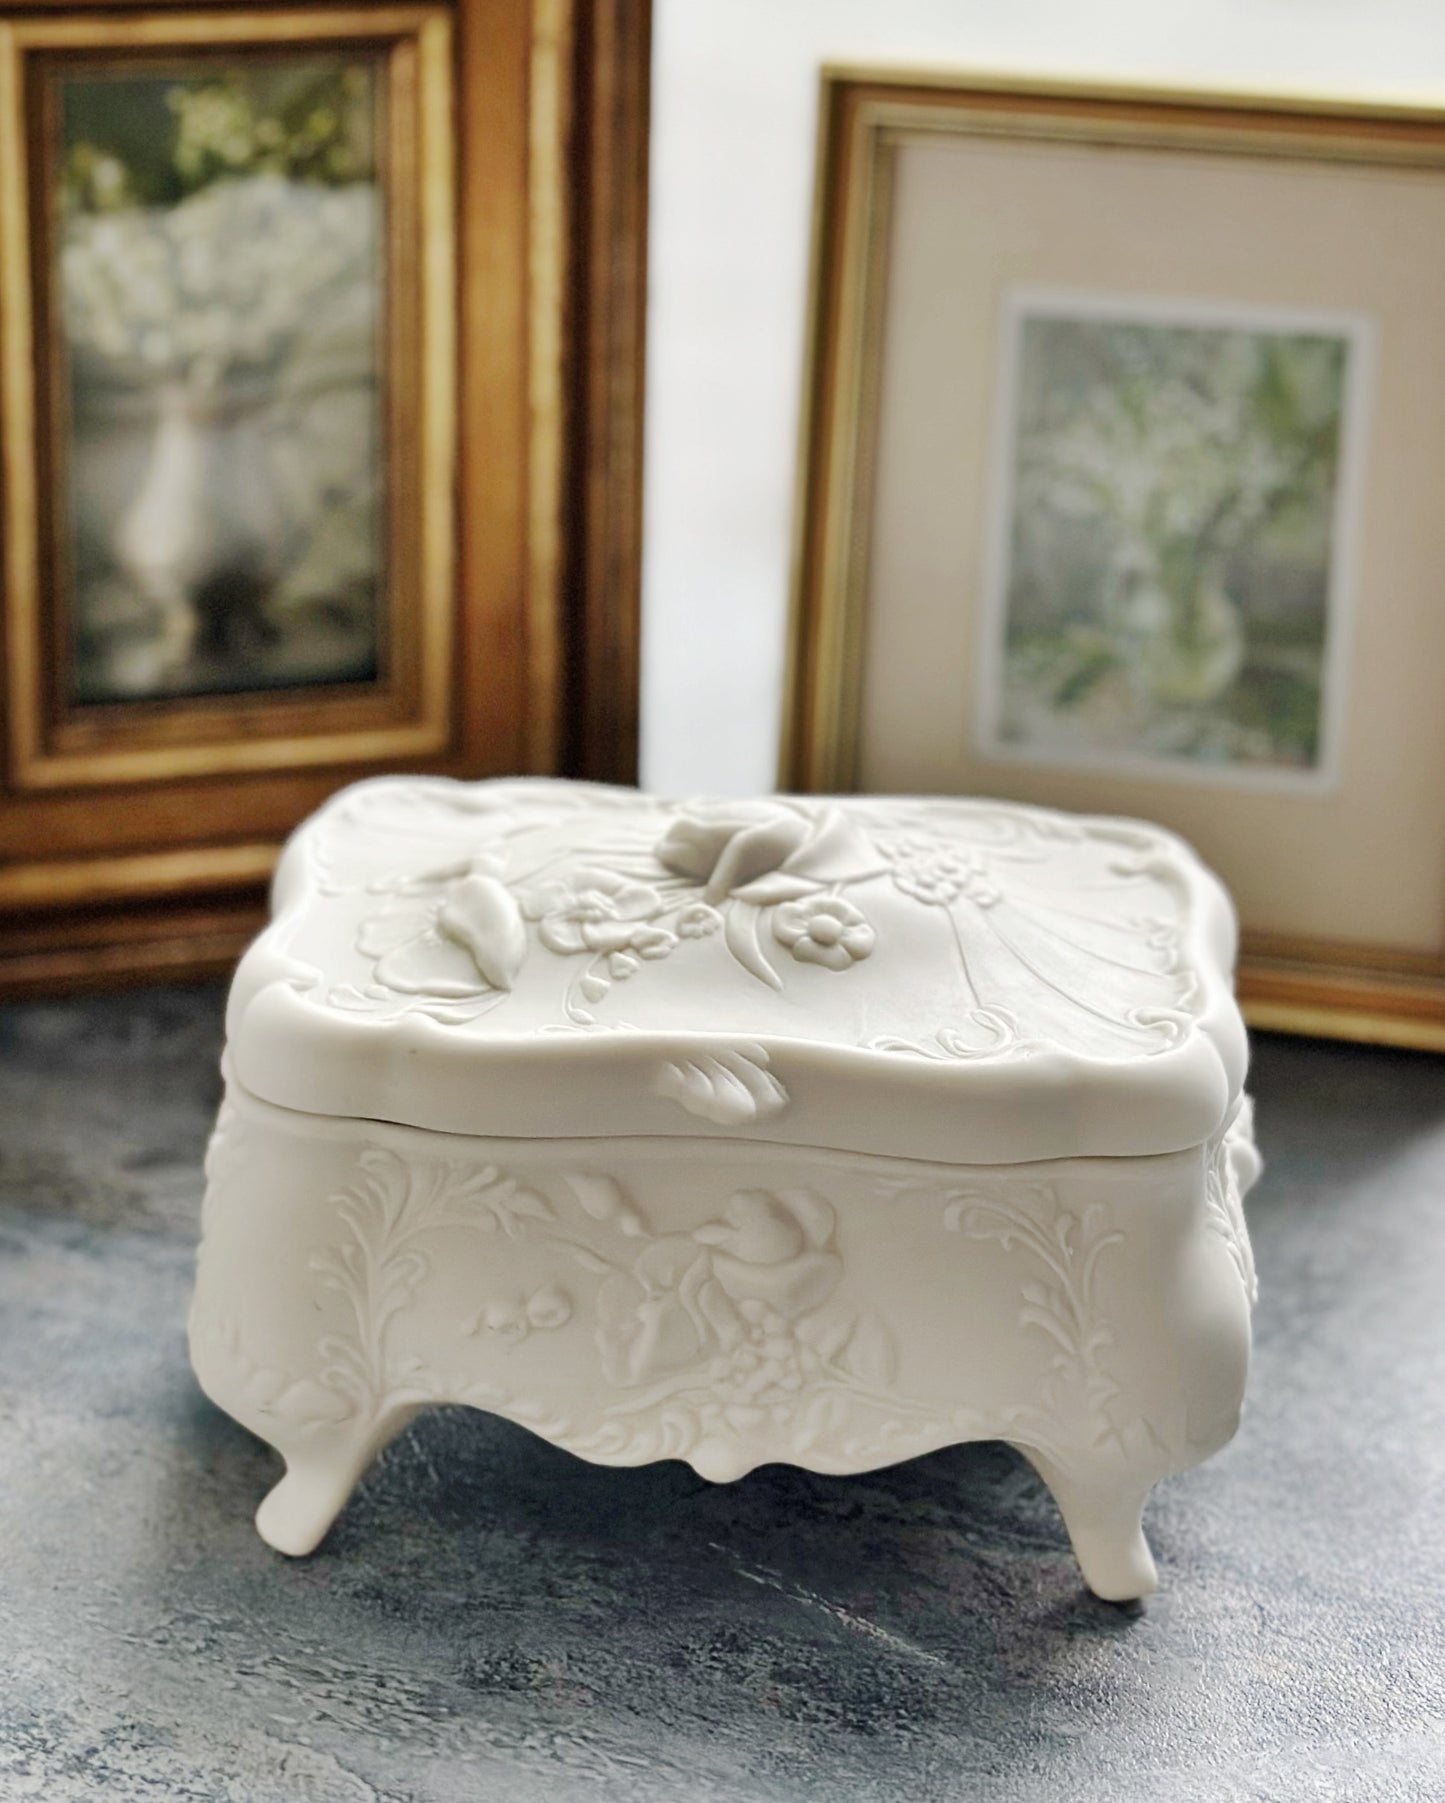 Vintage Victorian style lily of the valley porcelain trinket box